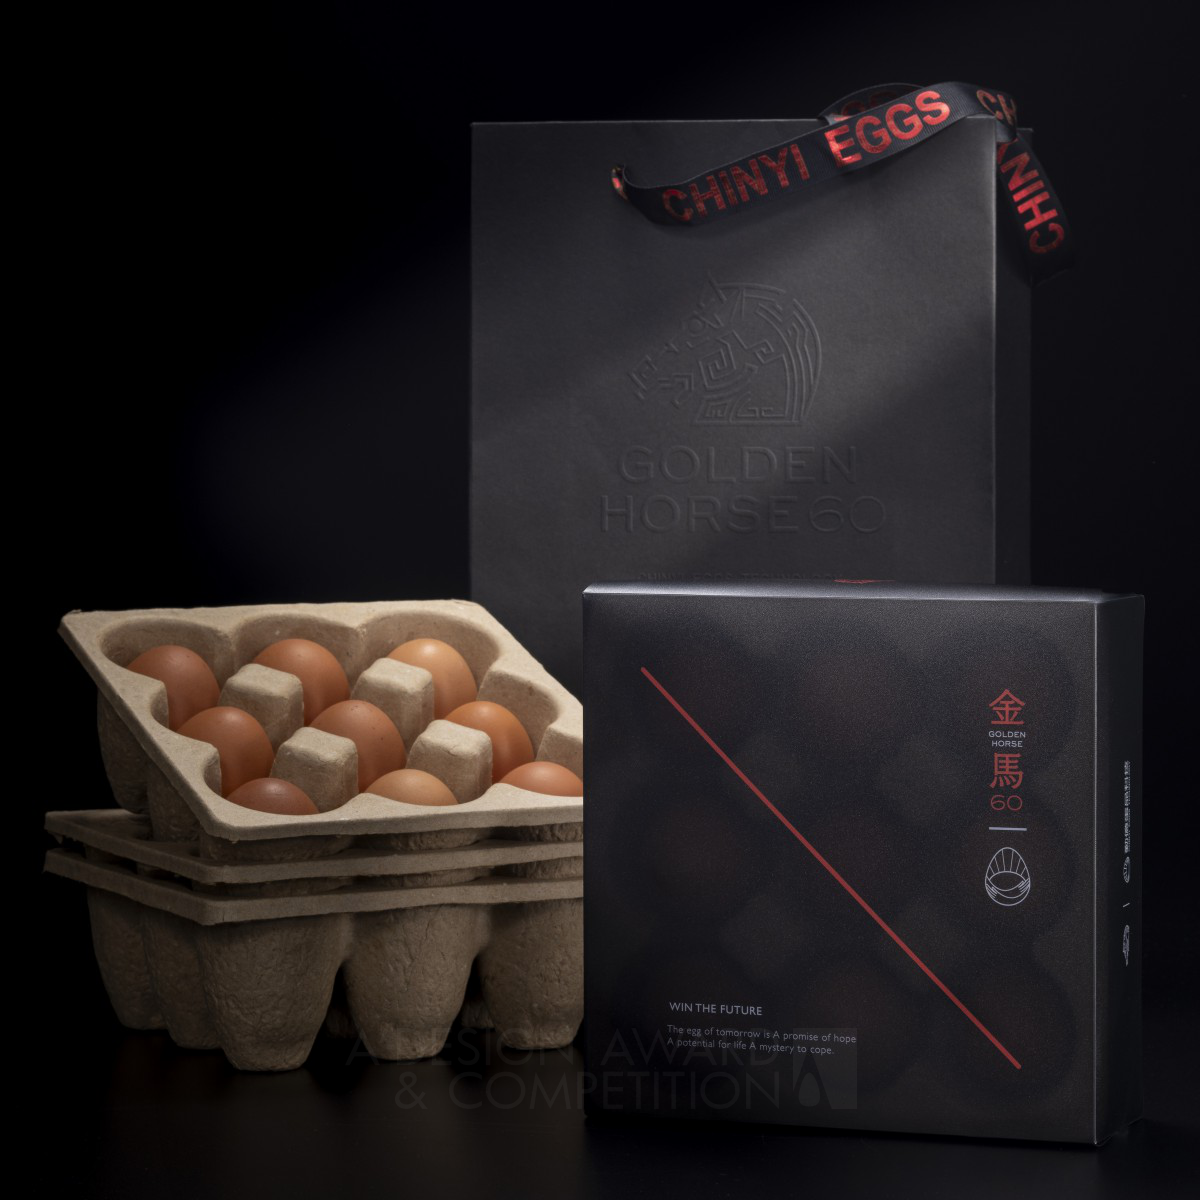 Chien-Cheng, Liu wins Silver at the prestigious A' Packaging Design Award with Win the Future Free-Range Egg Gift Box.